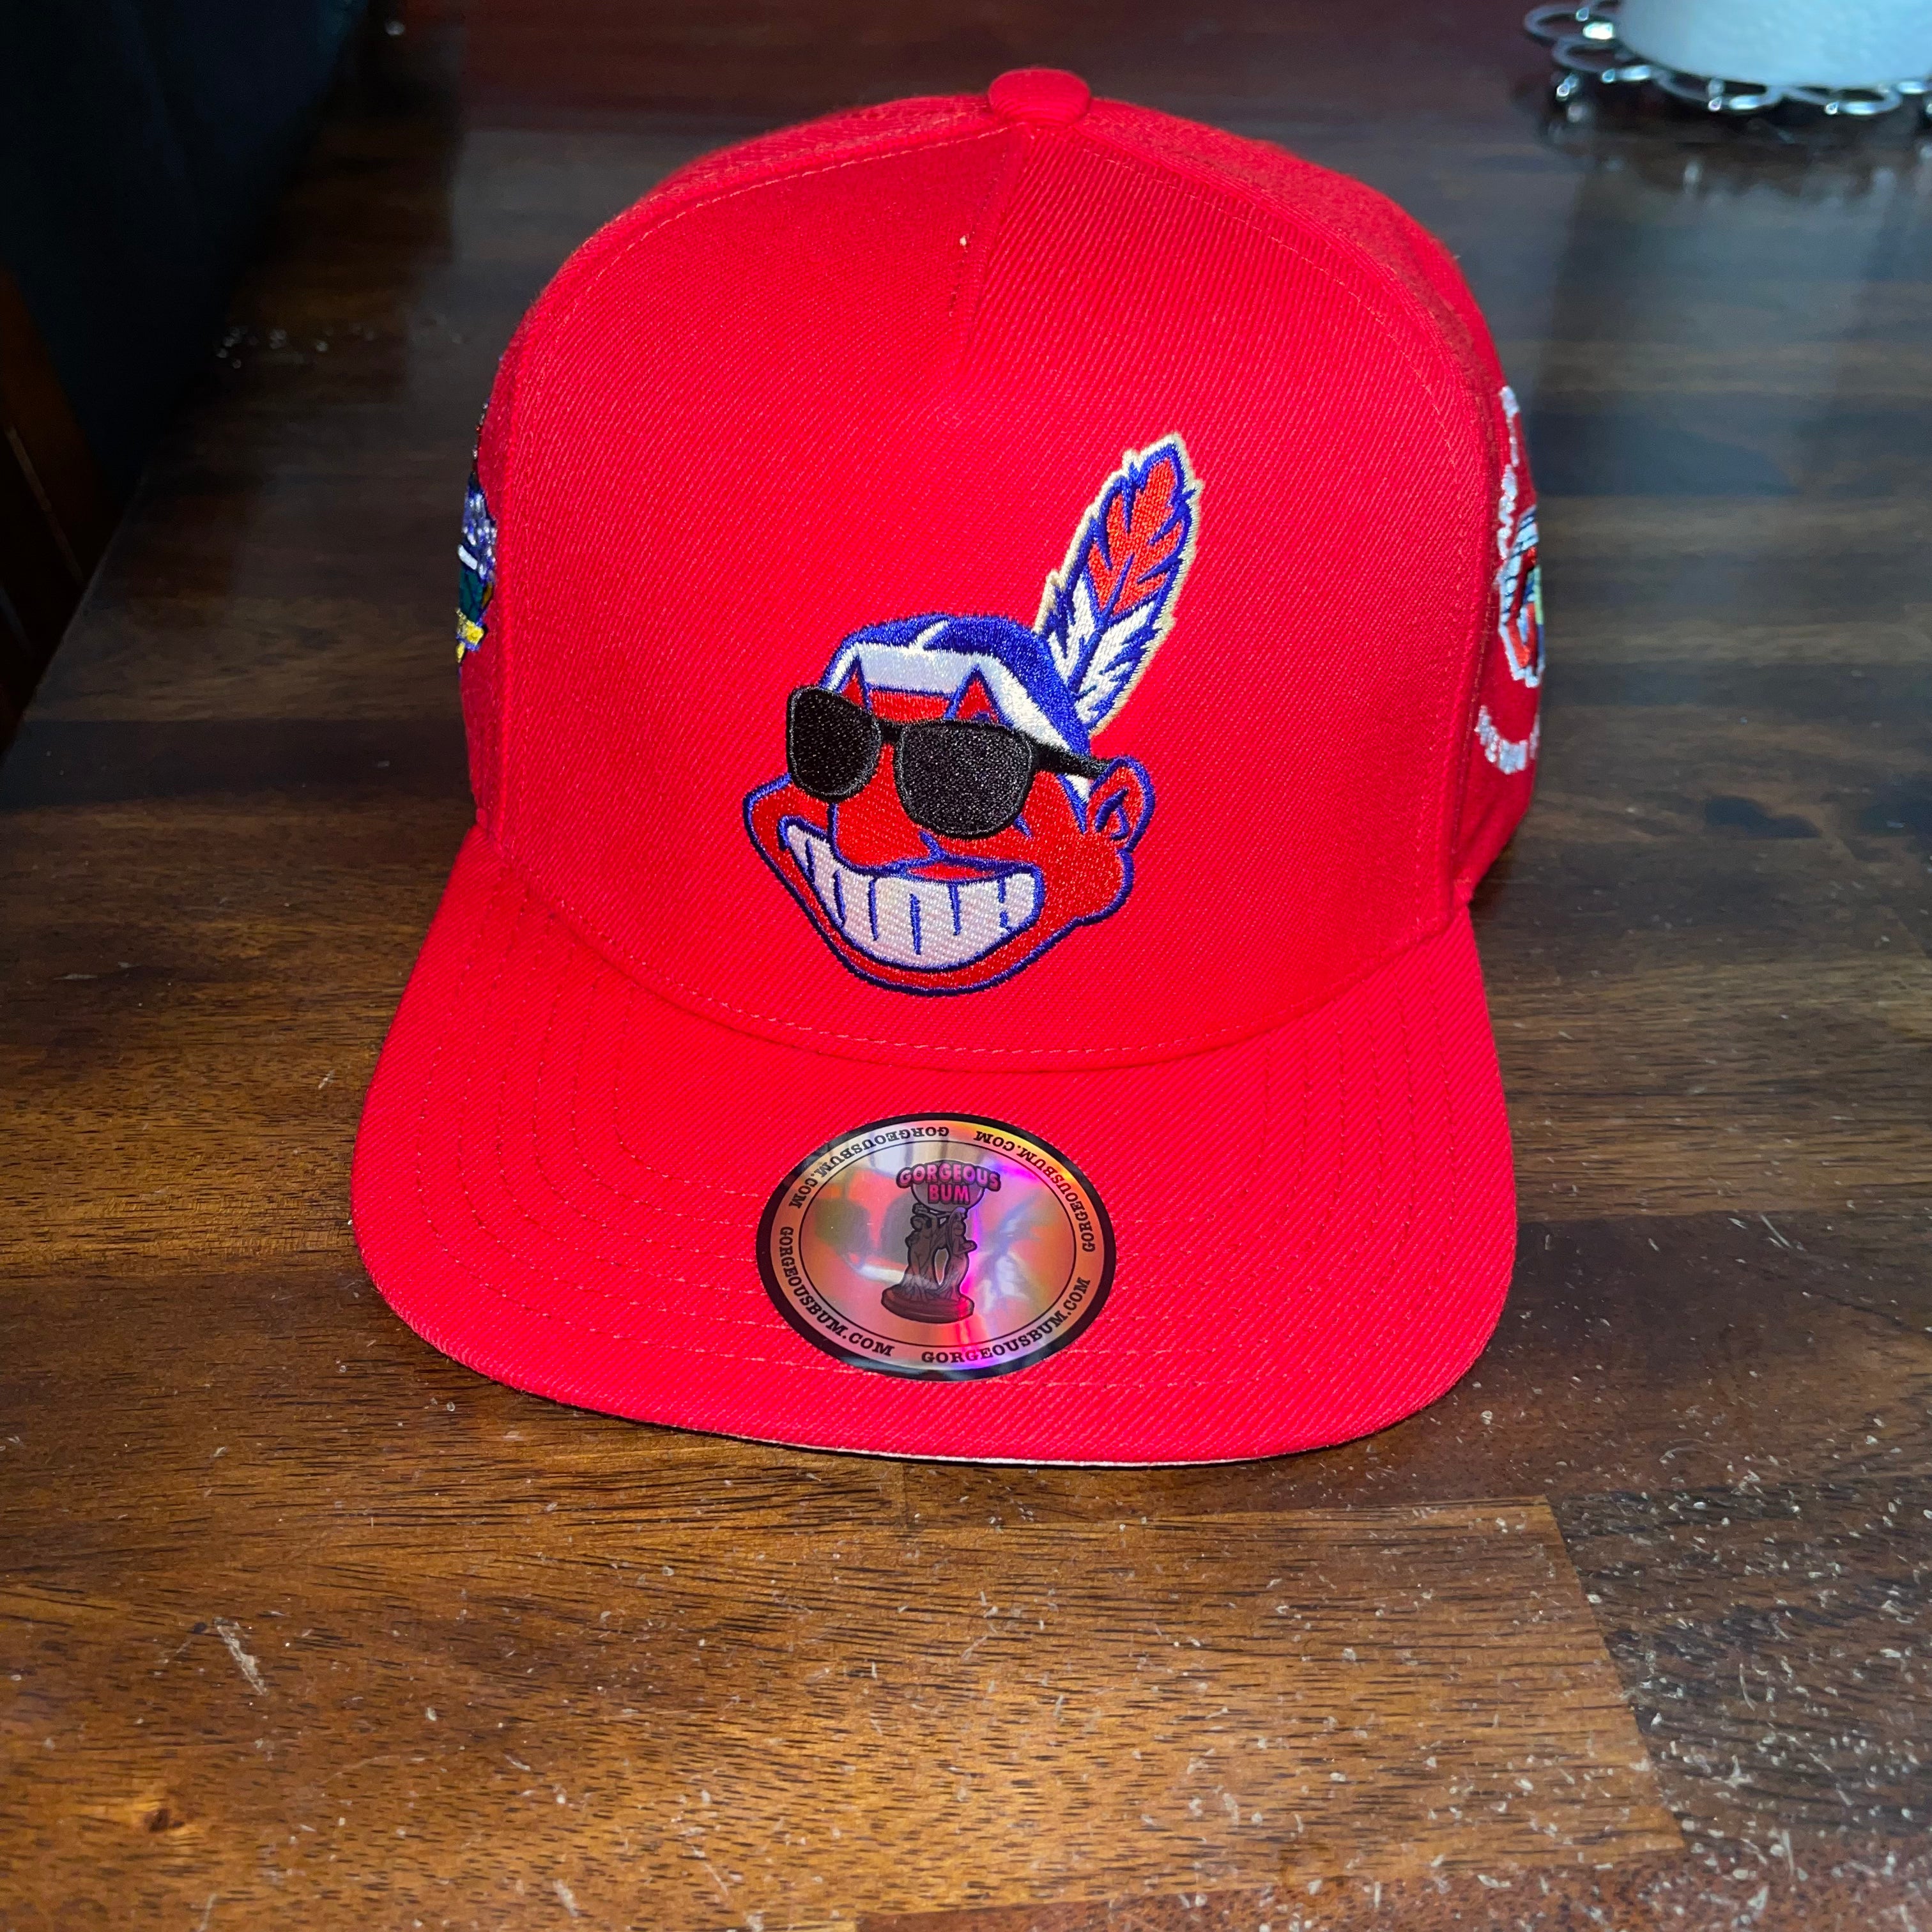 Red Indian snapback